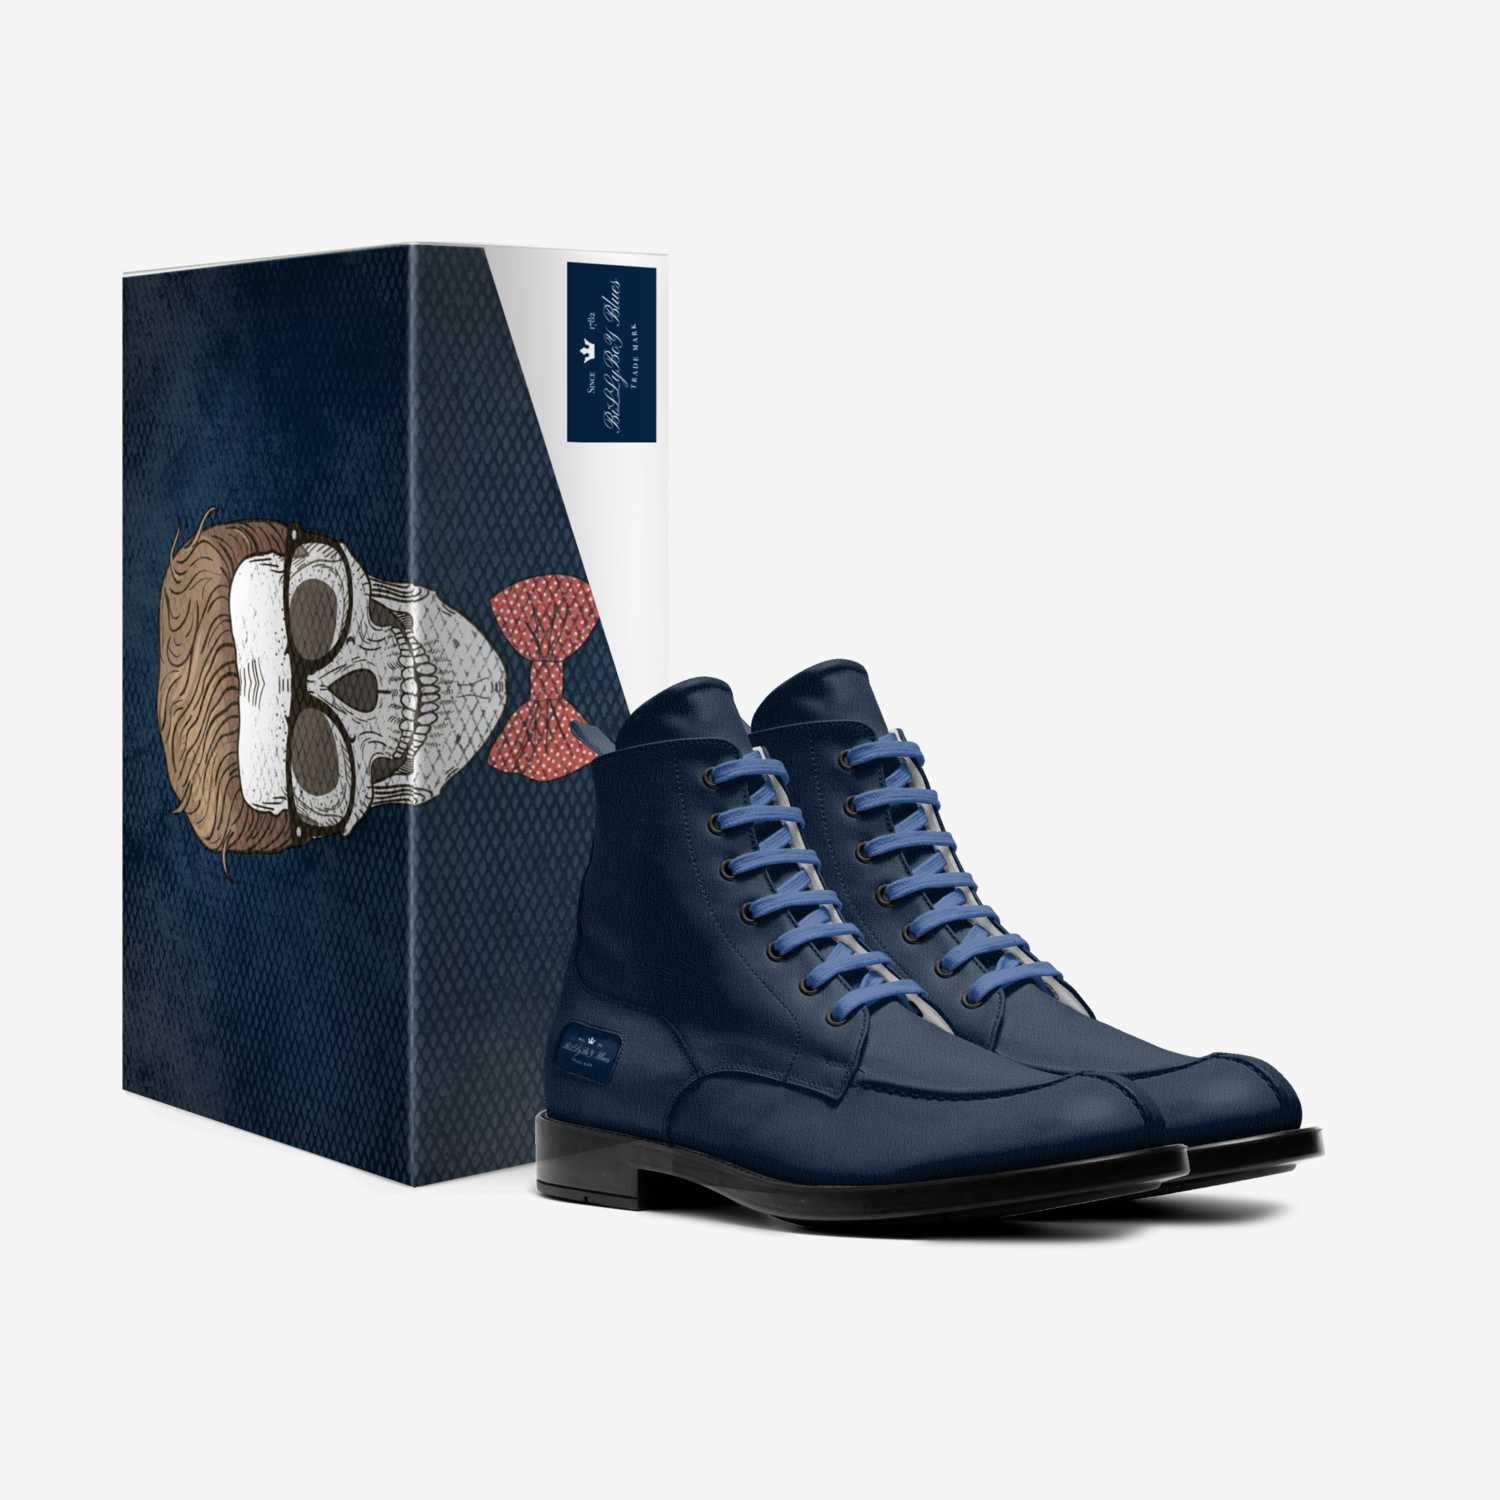 BiLLyBoY Blues custom made in Italy shoes by Bill Porter | Box view